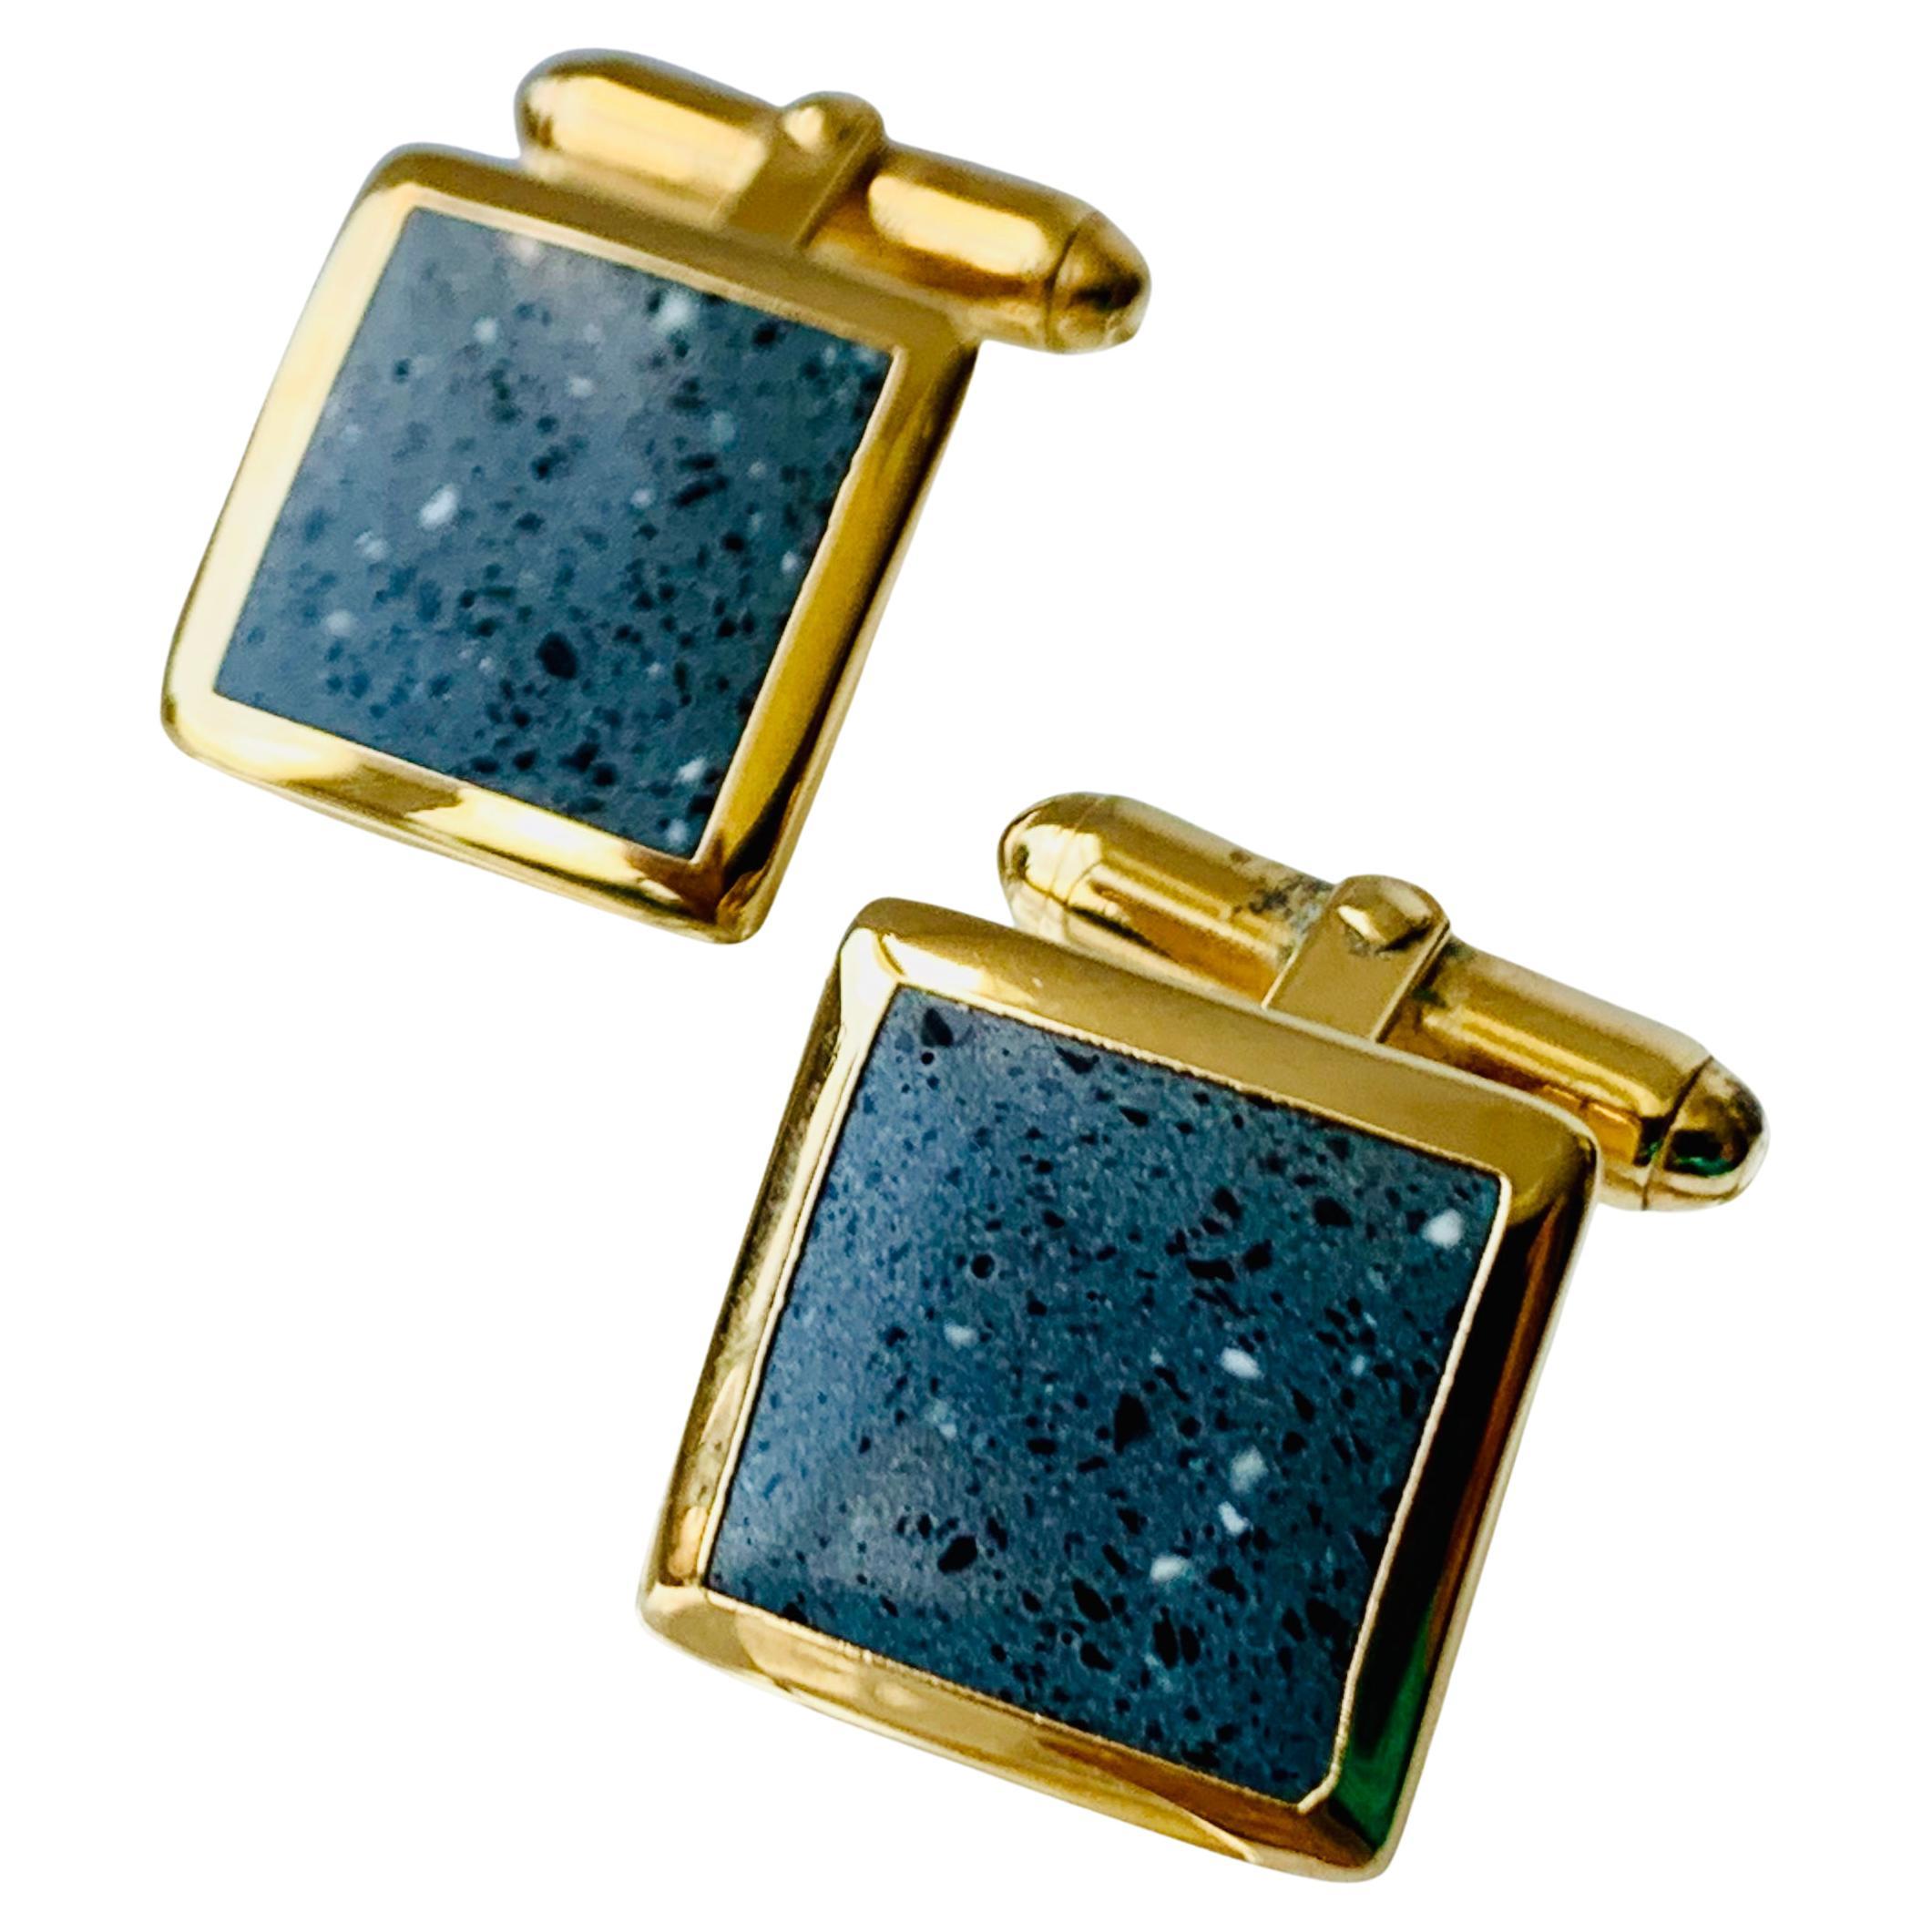 A Pair of Square Cufflinks with Grey Speckled Enamel and "T" Backs For Sale